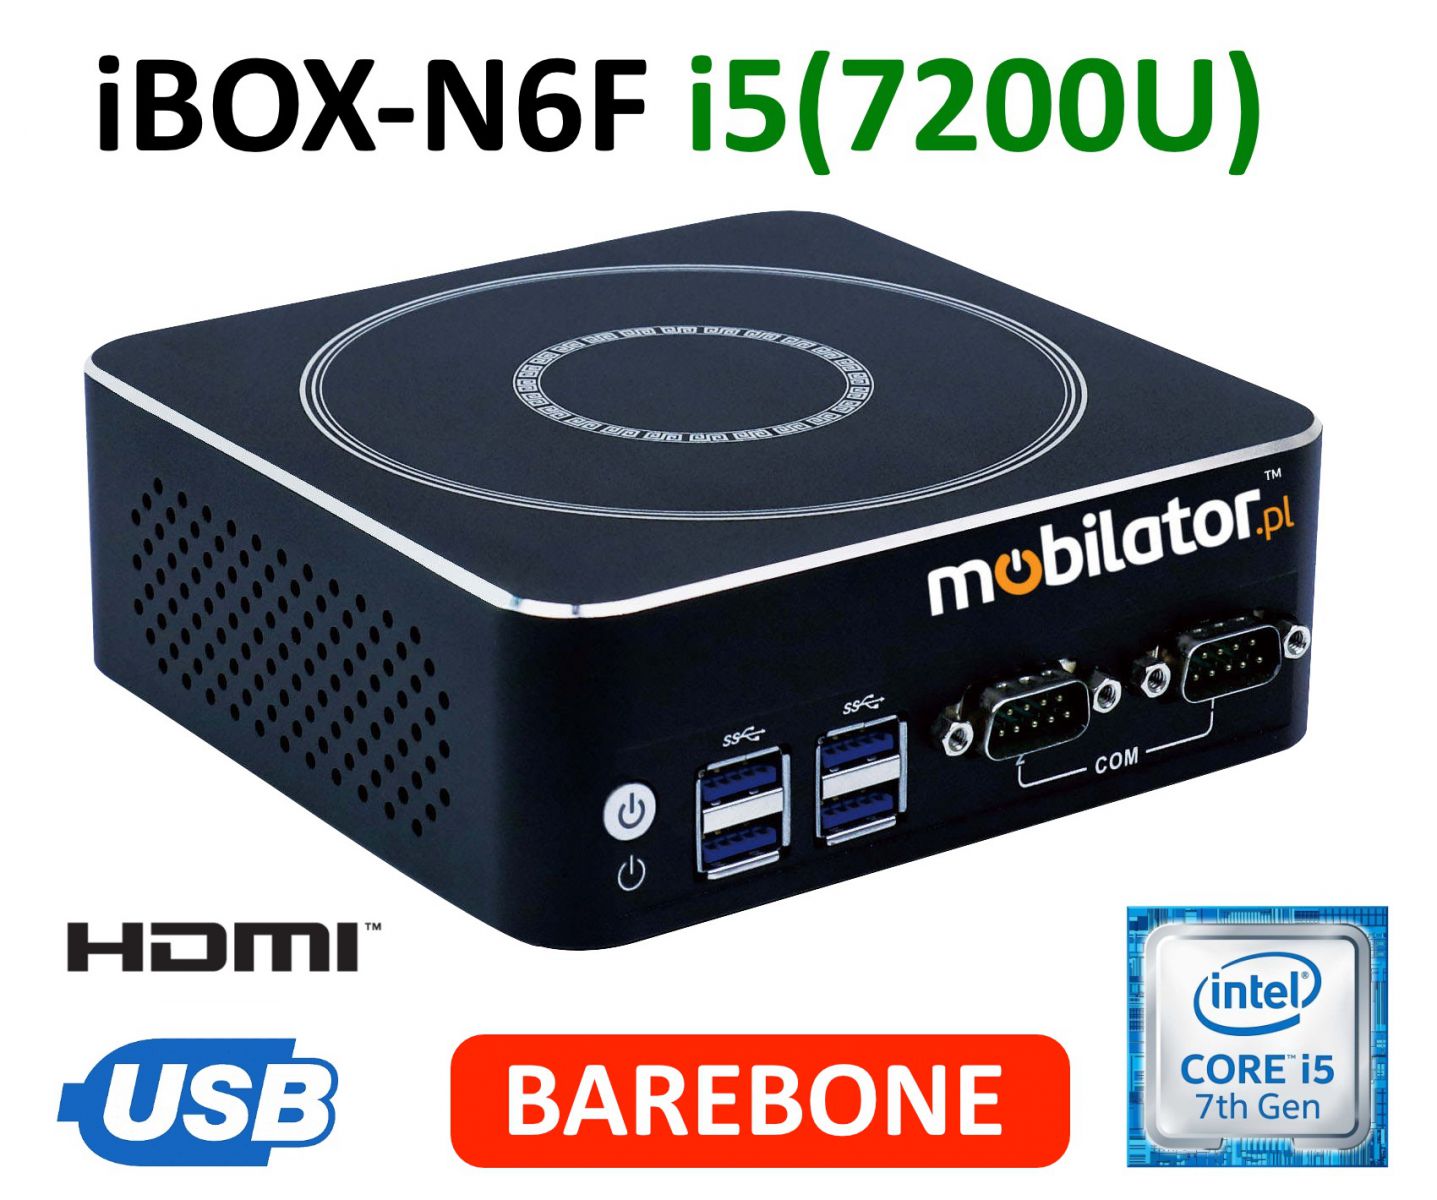 iBOX-N6F - Industrial warehouse computer with two RJ45 LAN cards